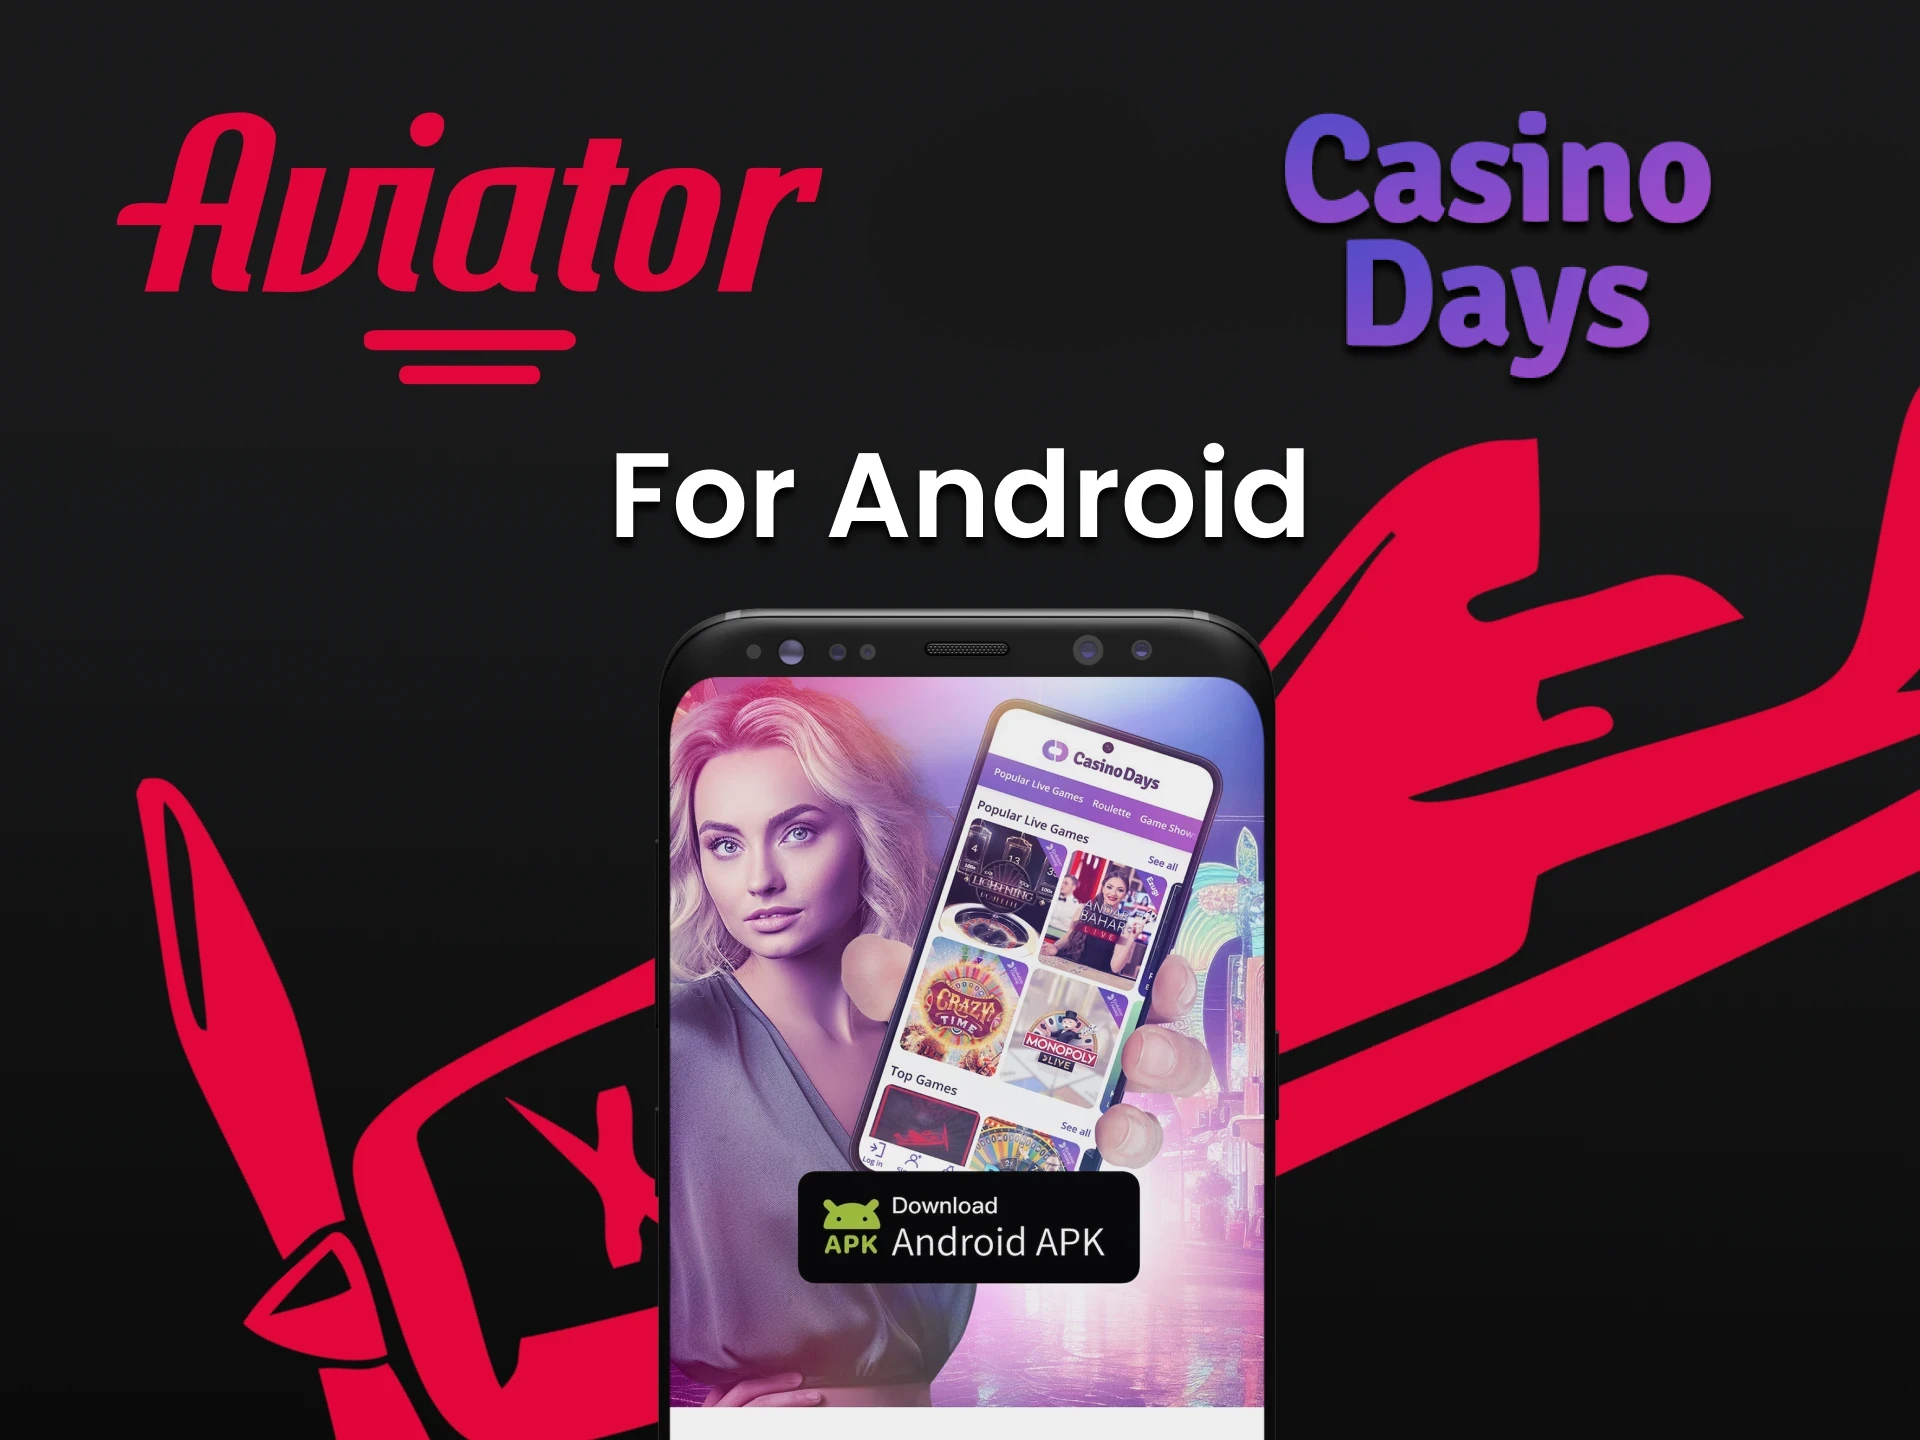 Play Aviator through the Casino Days app on Android.